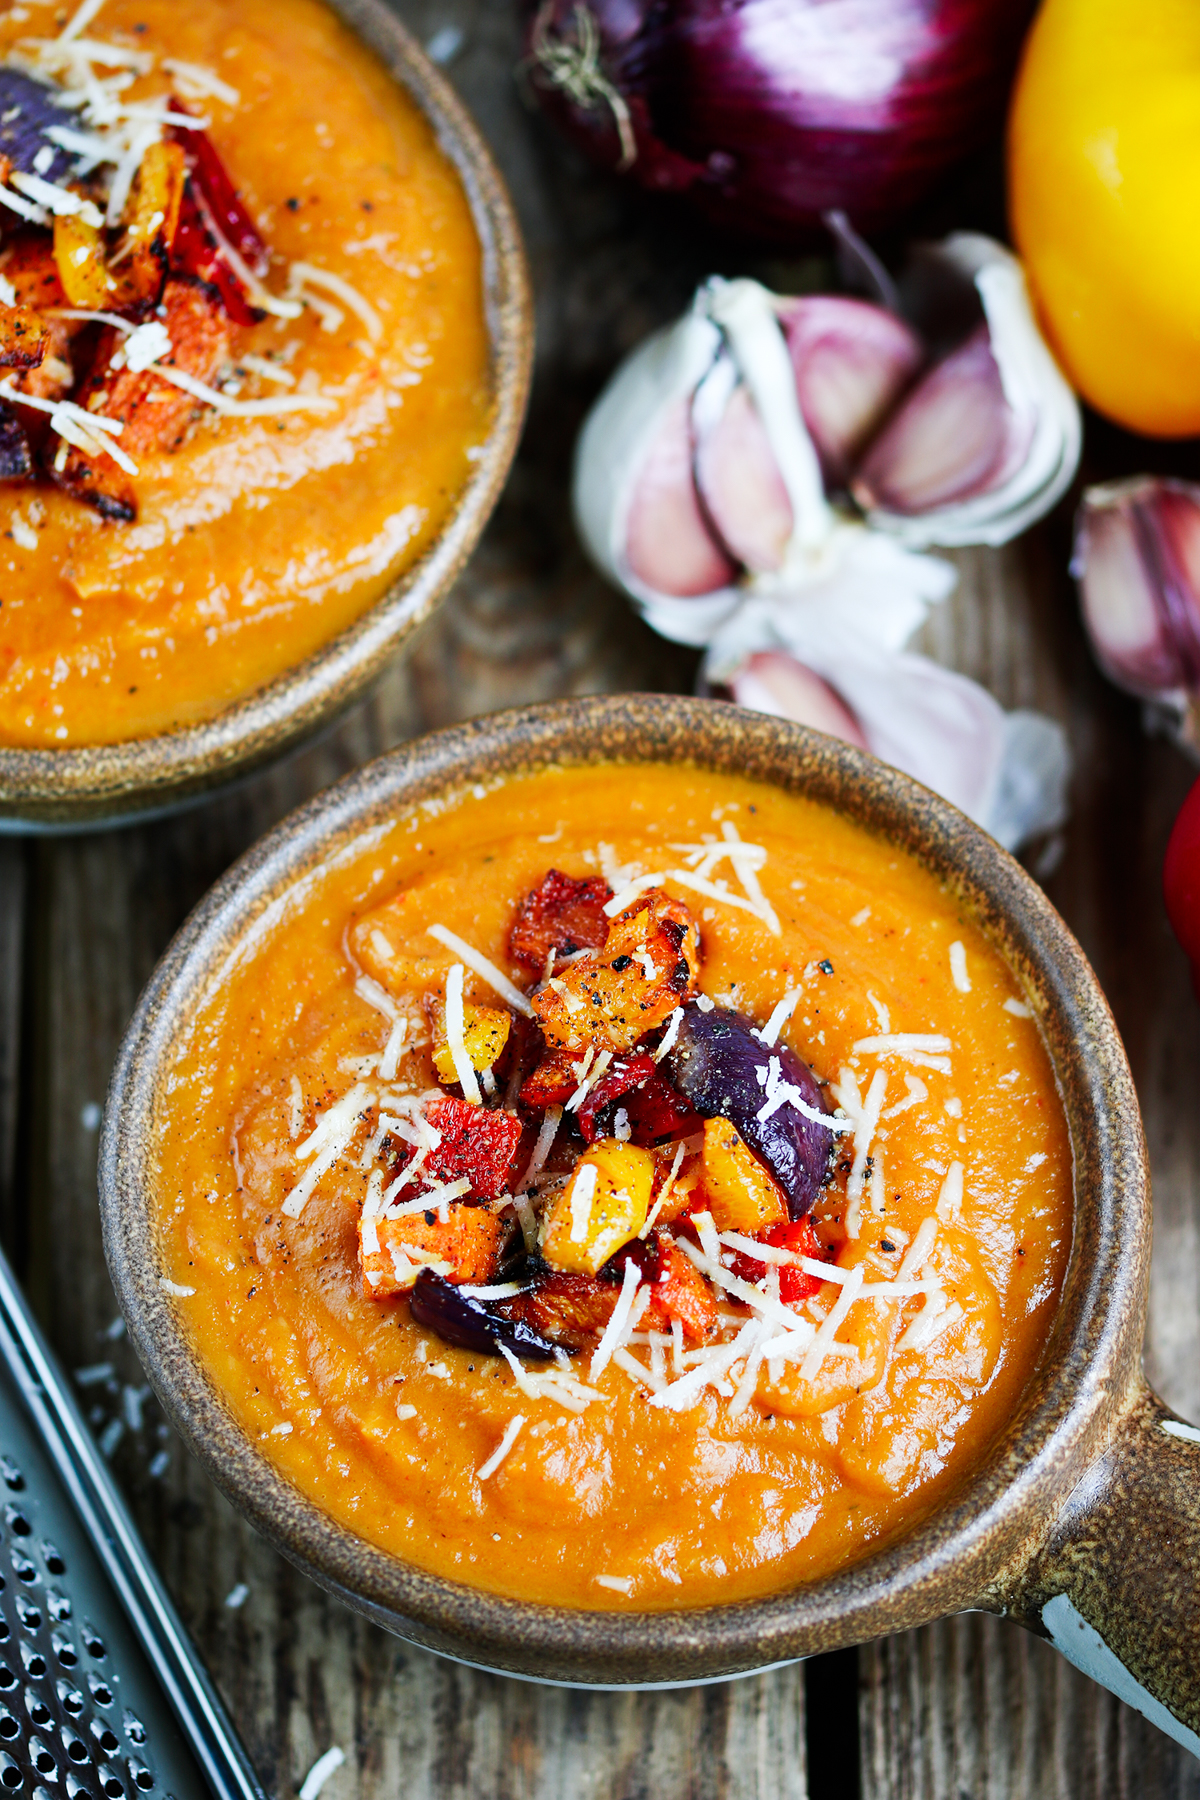 Roasted Veg and Parmesan Soup - a delicious winter lunch!